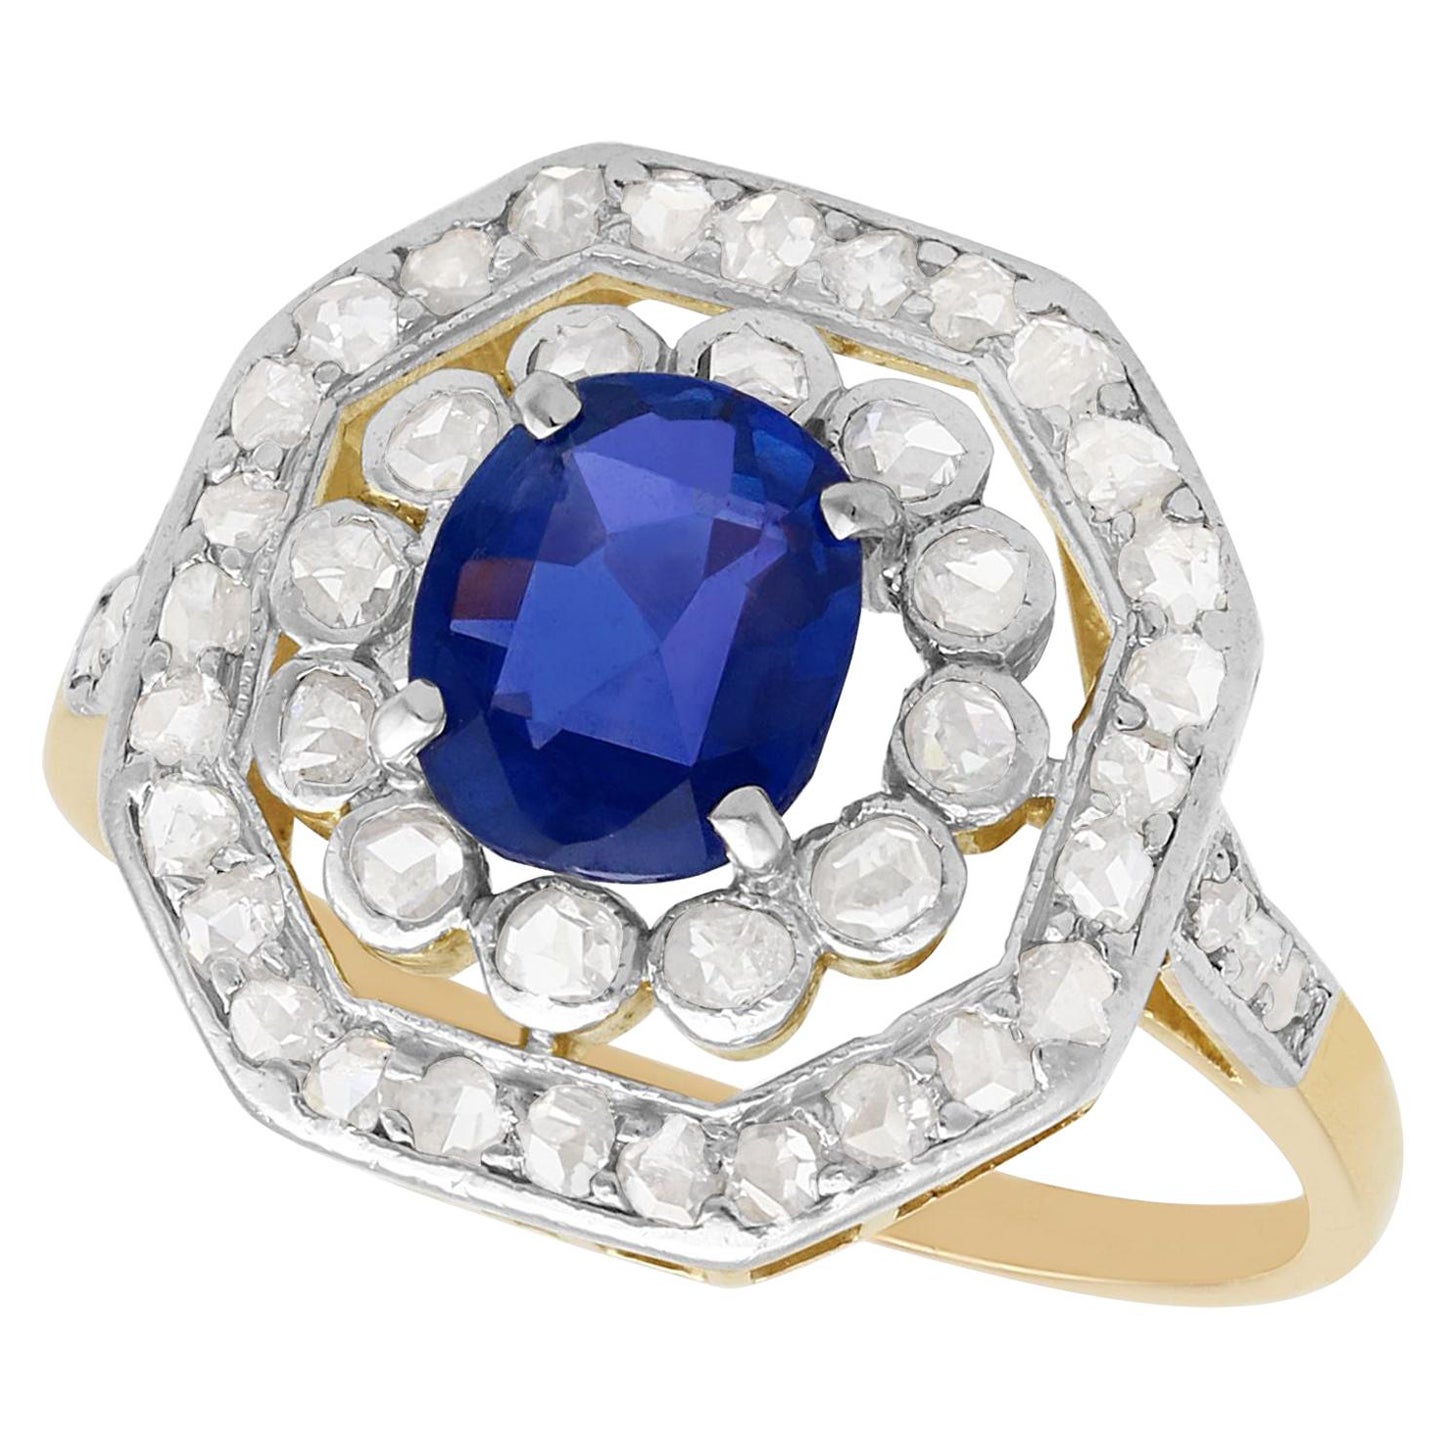 Antique Edwardian 1.02 Carat Blue Sapphire and Diamond Yellow Gold Cluster Ring